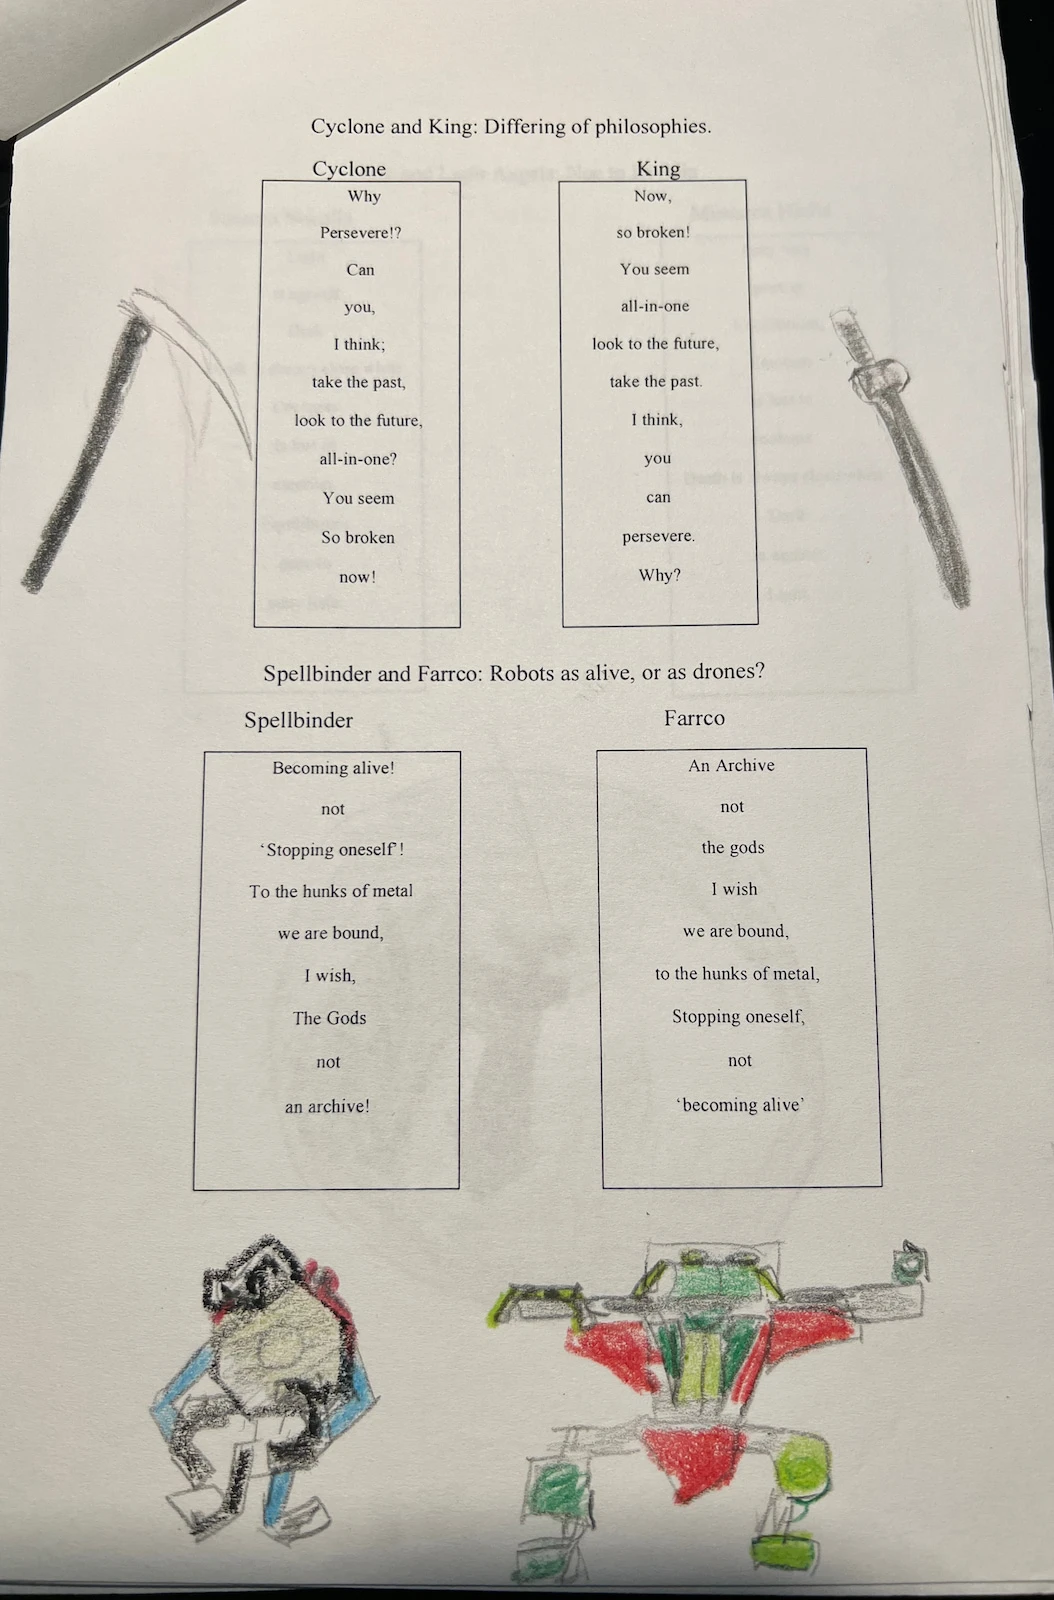 Image of the character mirror poems as part of a schoolwork poetry book